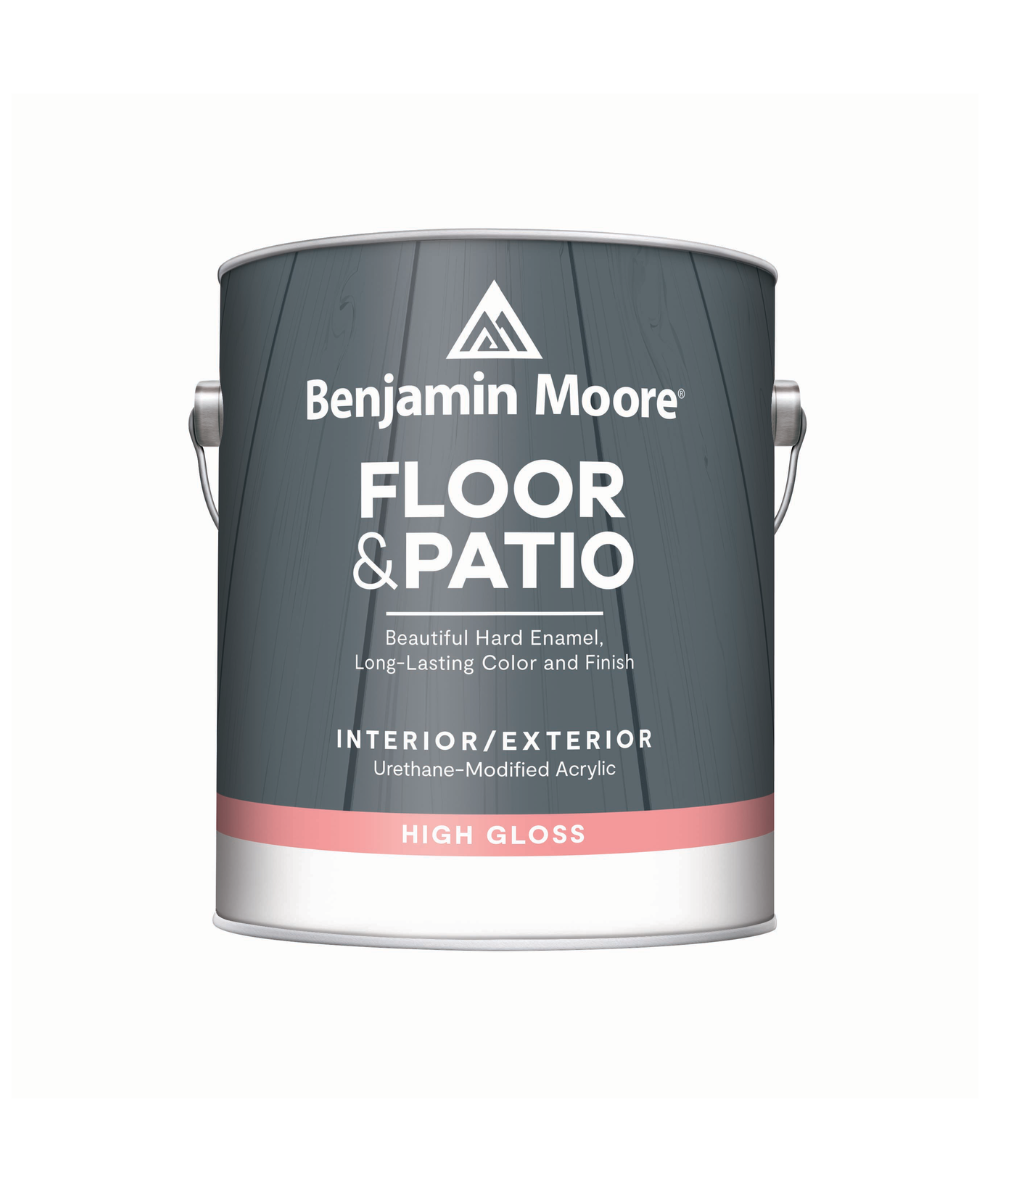 Benjamin Moore floor and patio high gloss Interior Paint available at JC Licht.